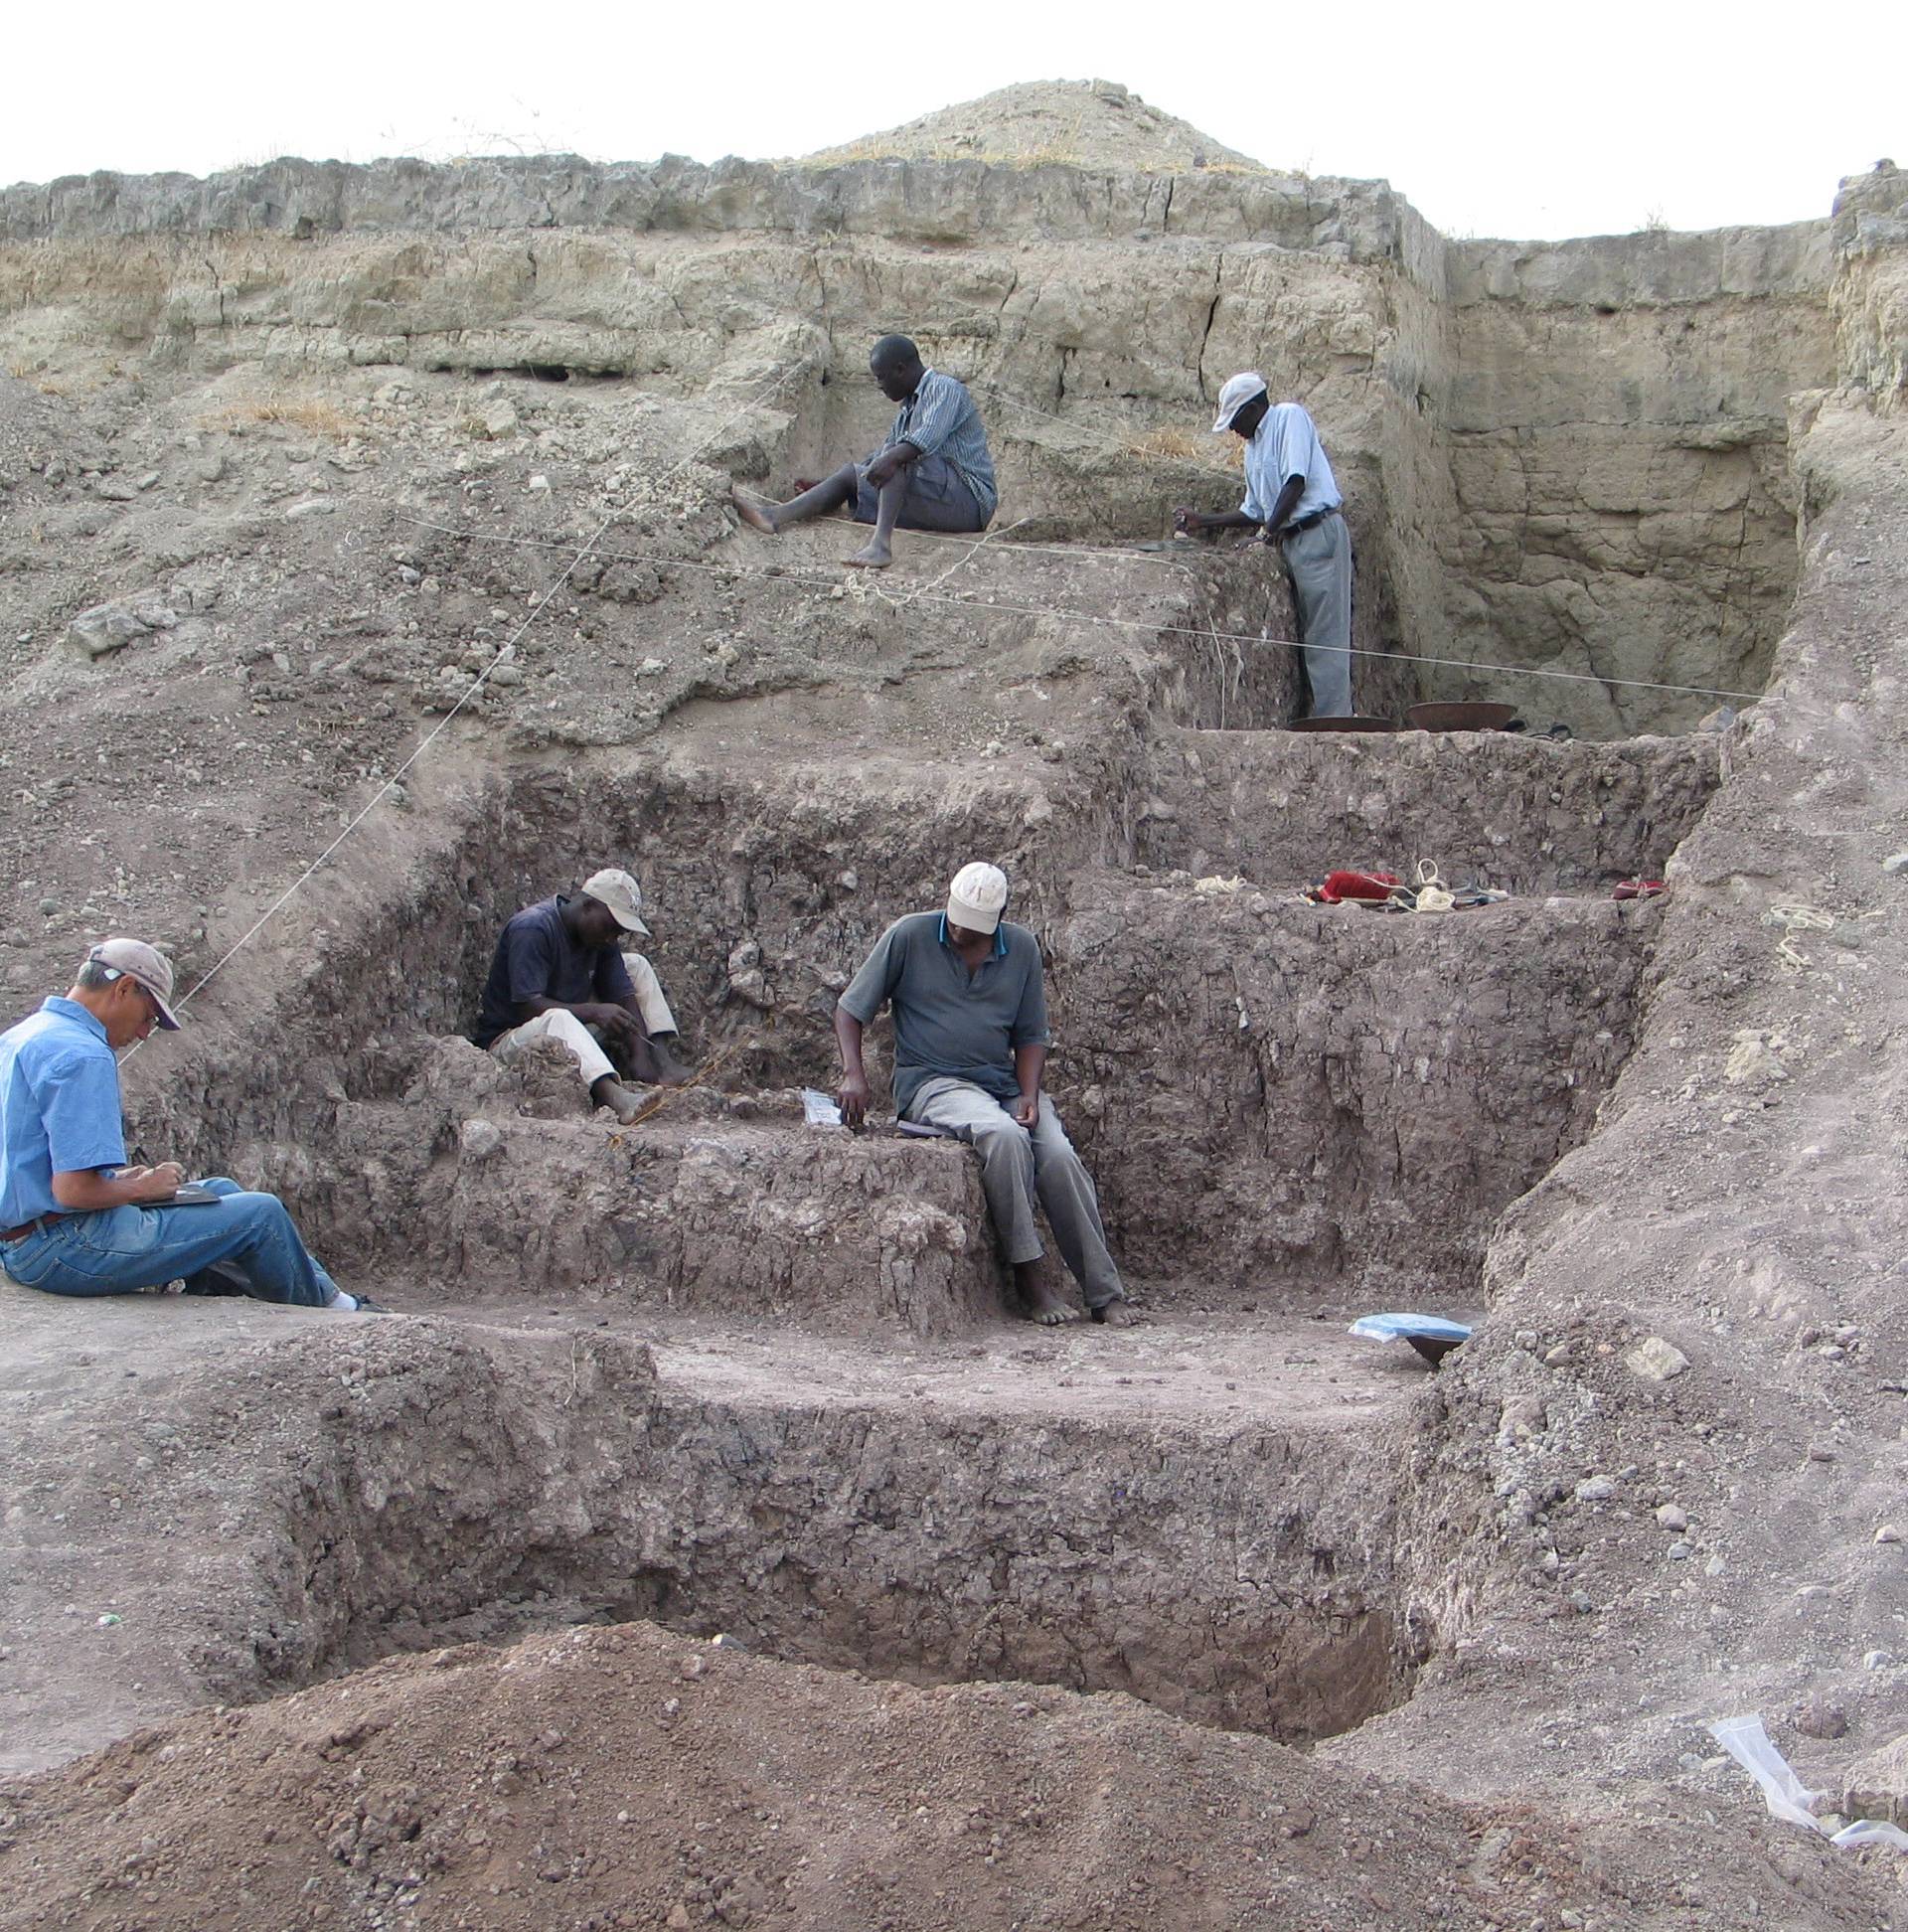 Smithsonian researchers are seen at the Olorgesailie Basin excavation site in southern Kenya